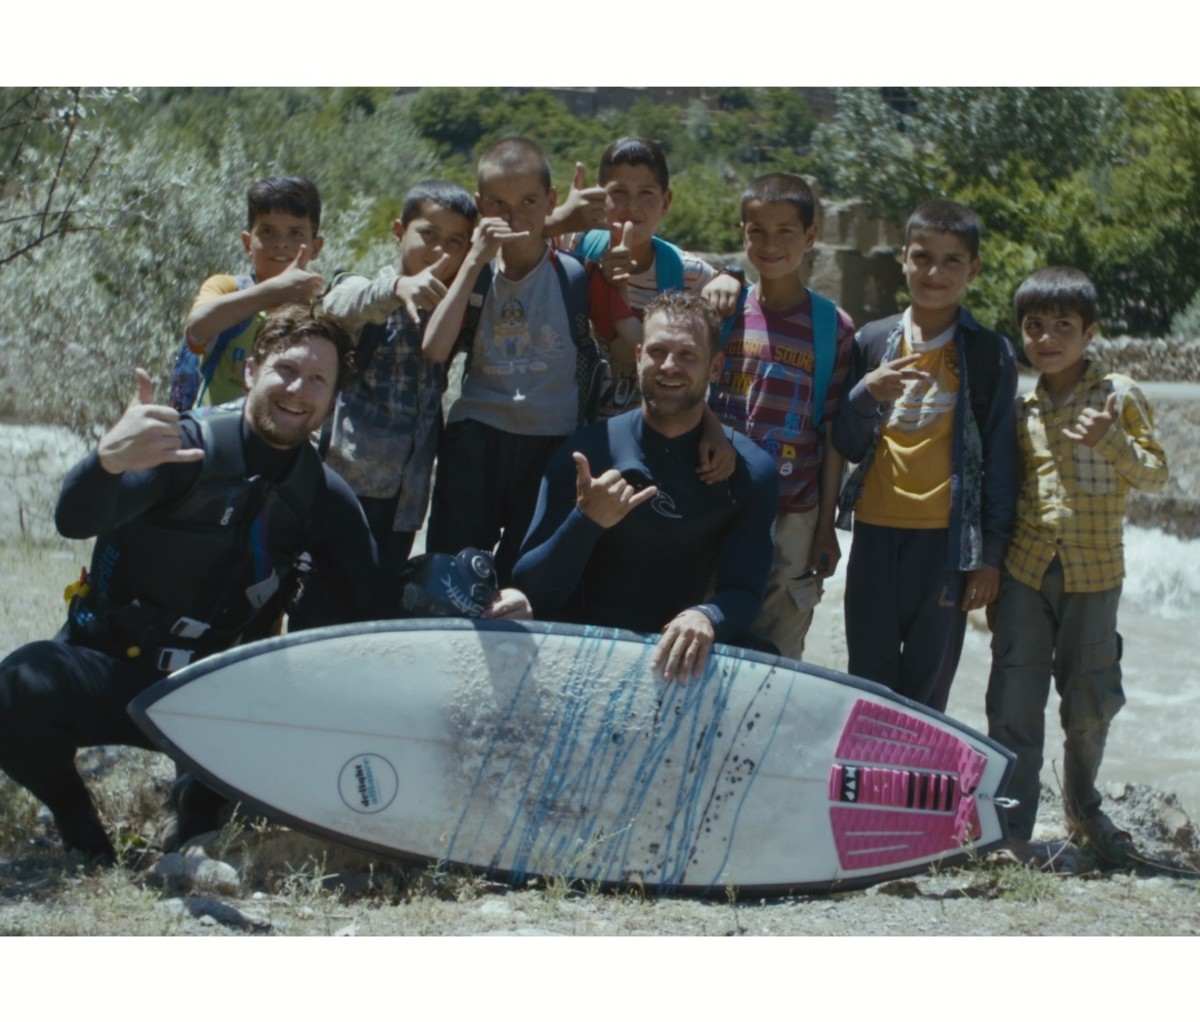 Jacob Kelly Quinlan poses with local kids after surfing a river in Afghanistan